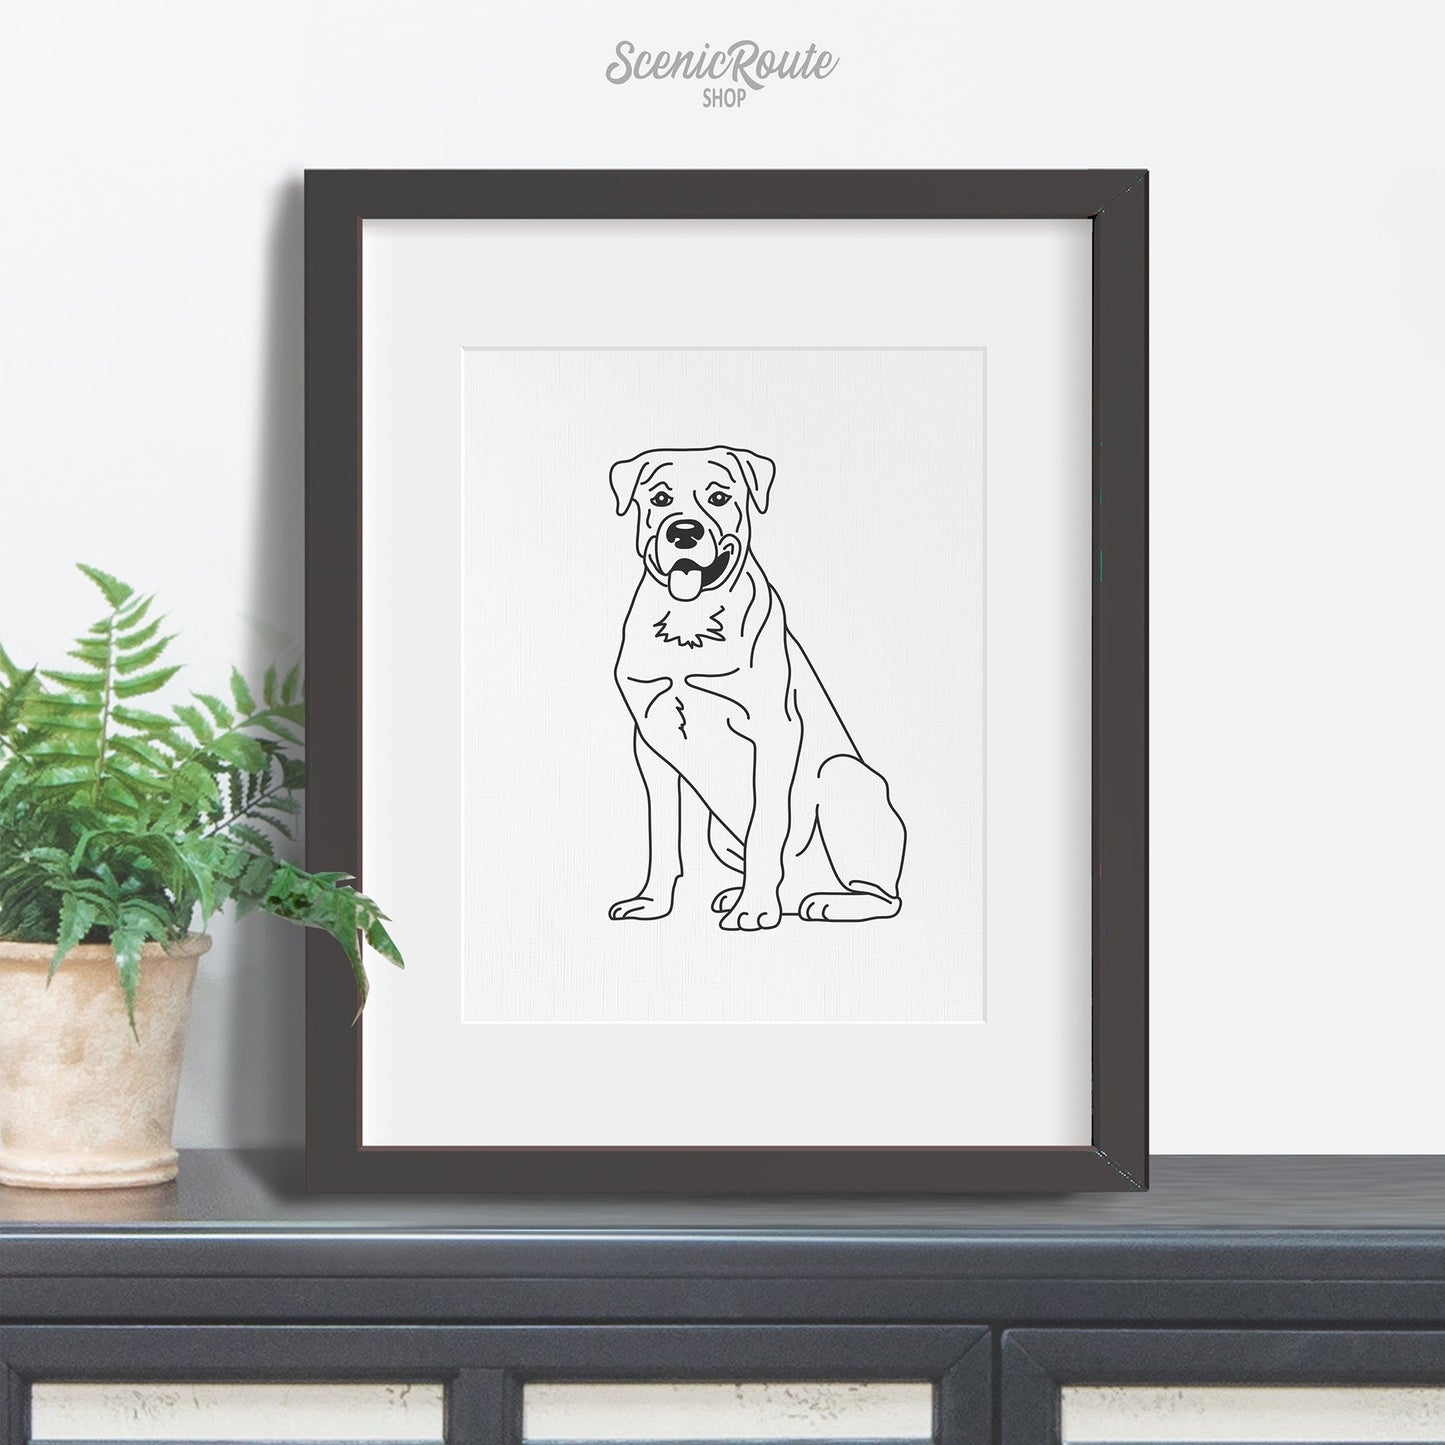 A framed line art drawing of a Rottweiler dog on a credenza with a plant